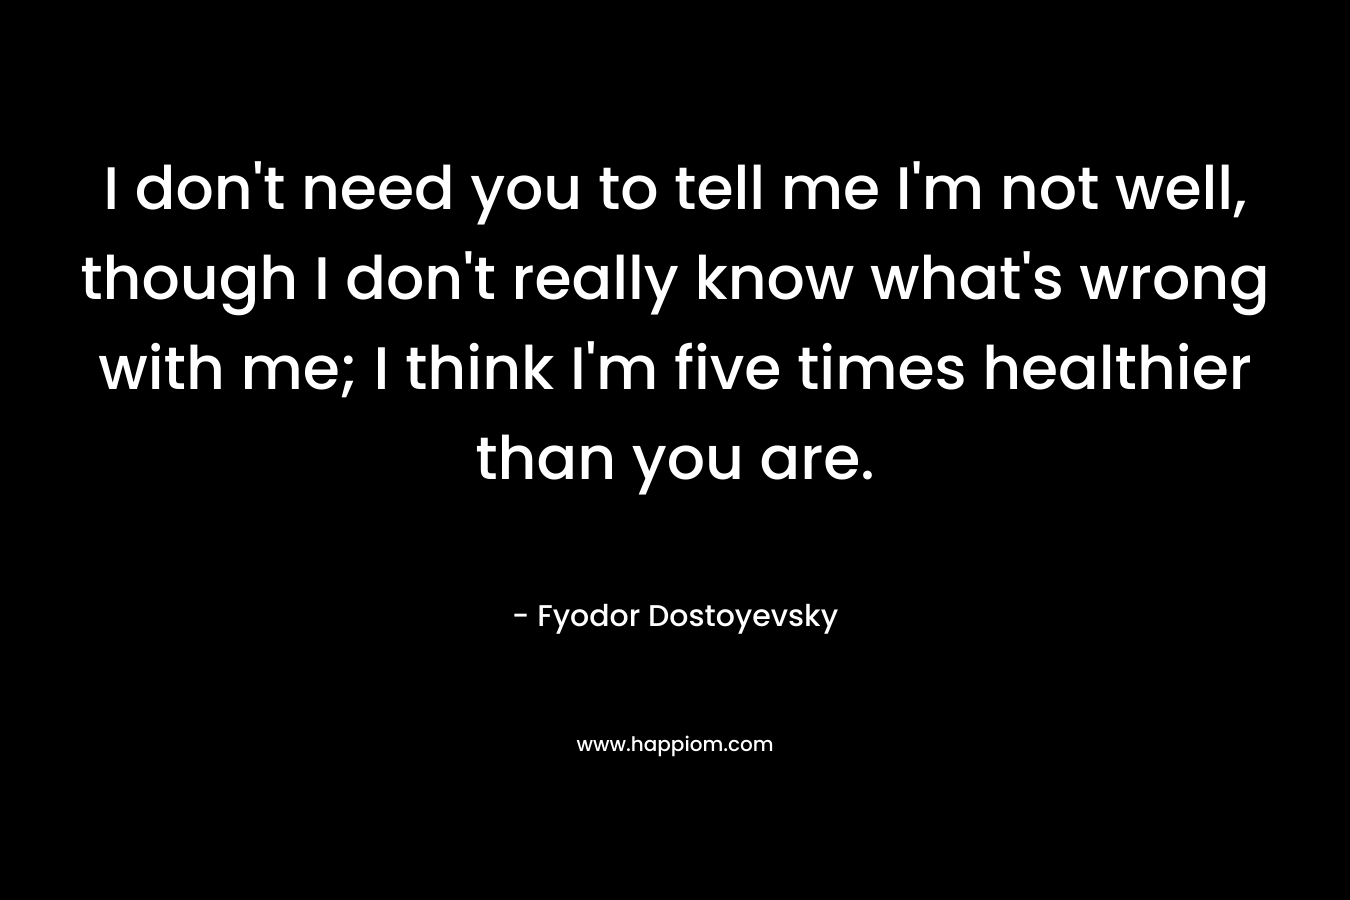 I don’t need you to tell me I’m not well, though I don’t really know what’s wrong with me; I think I’m five times healthier than you are. – Fyodor Dostoyevsky